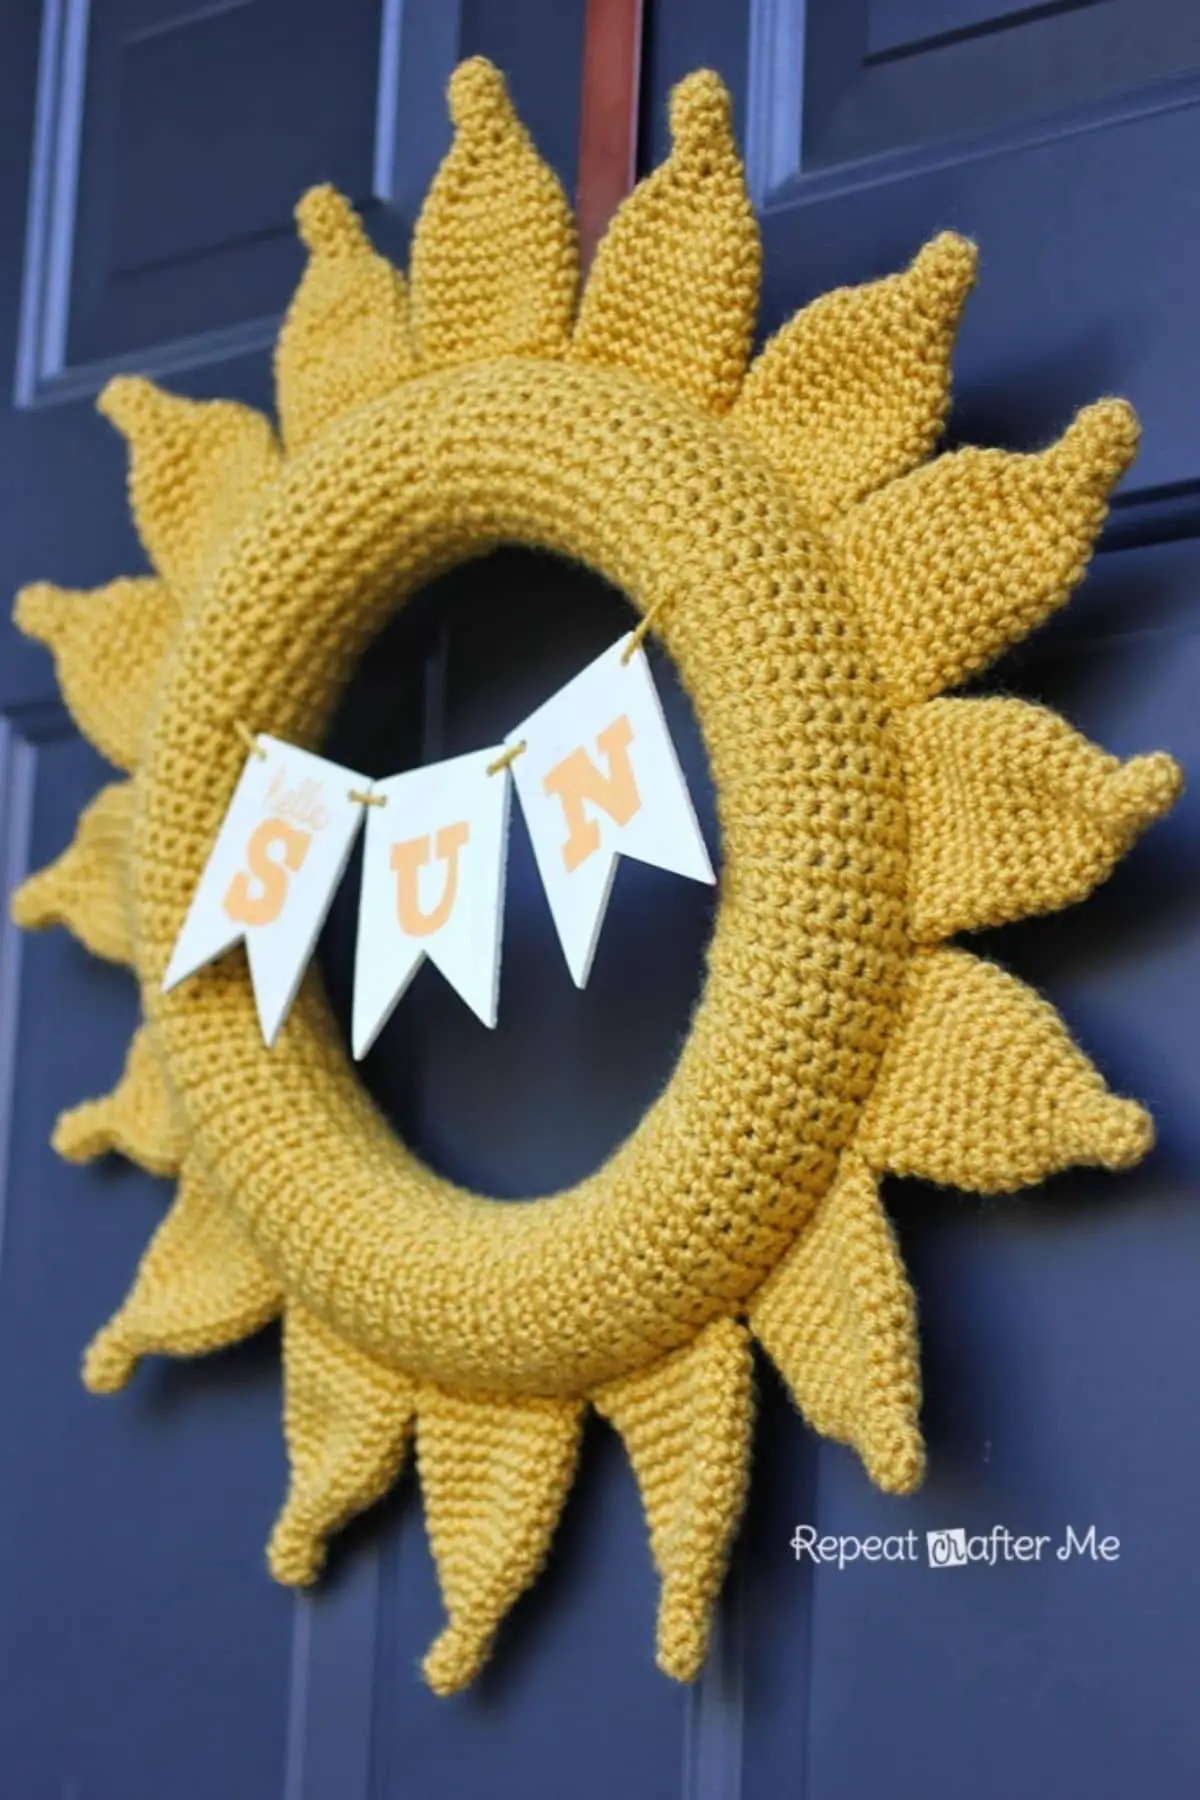 yellow crochet sun wreath craft that says sun hanging from a banner in the center of the sun